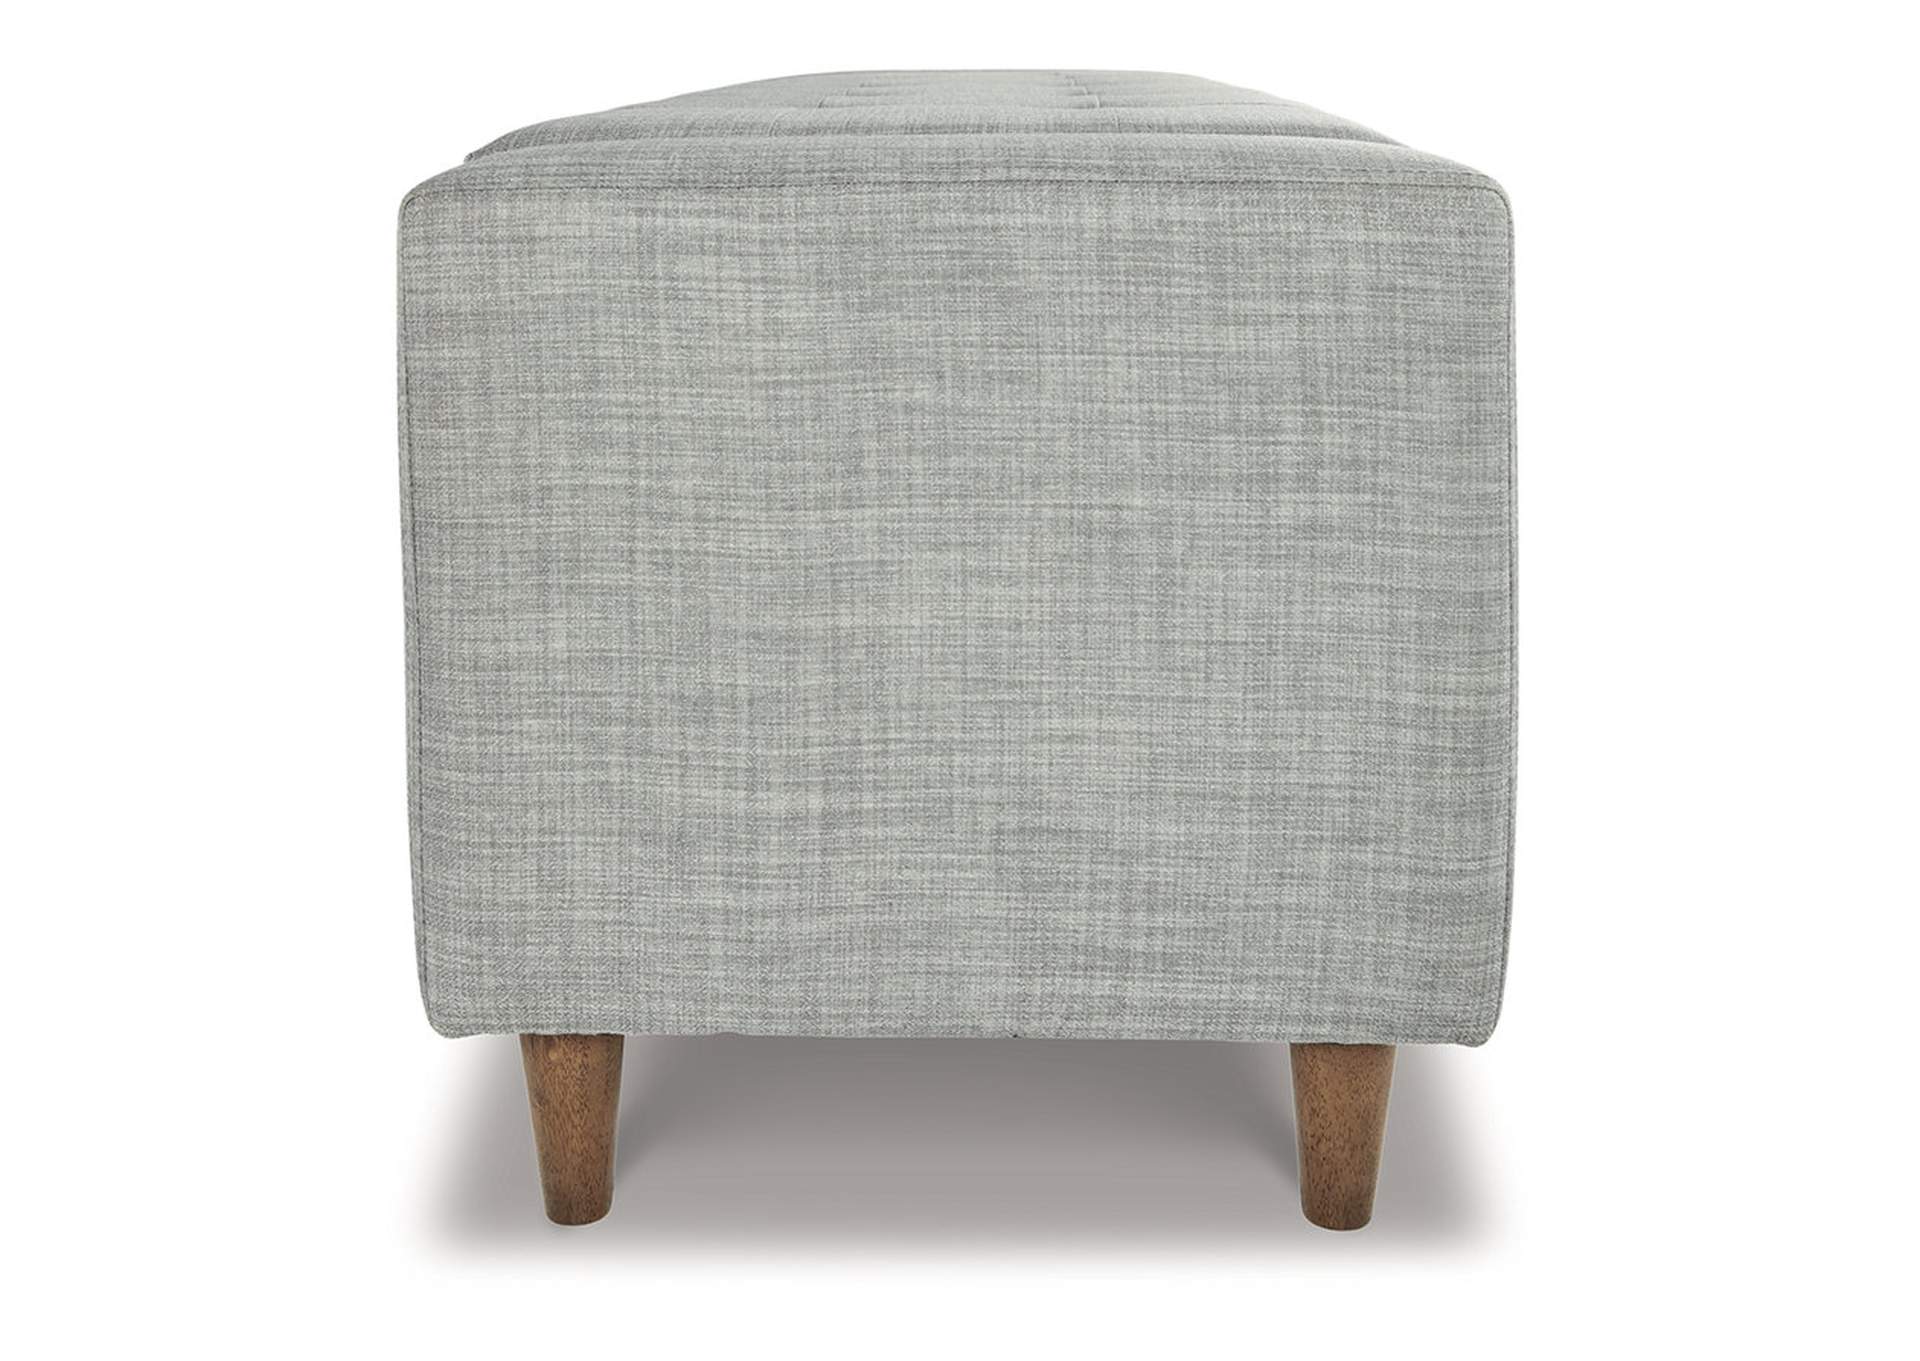 Winler Upholstered Accent Bench,Signature Design By Ashley